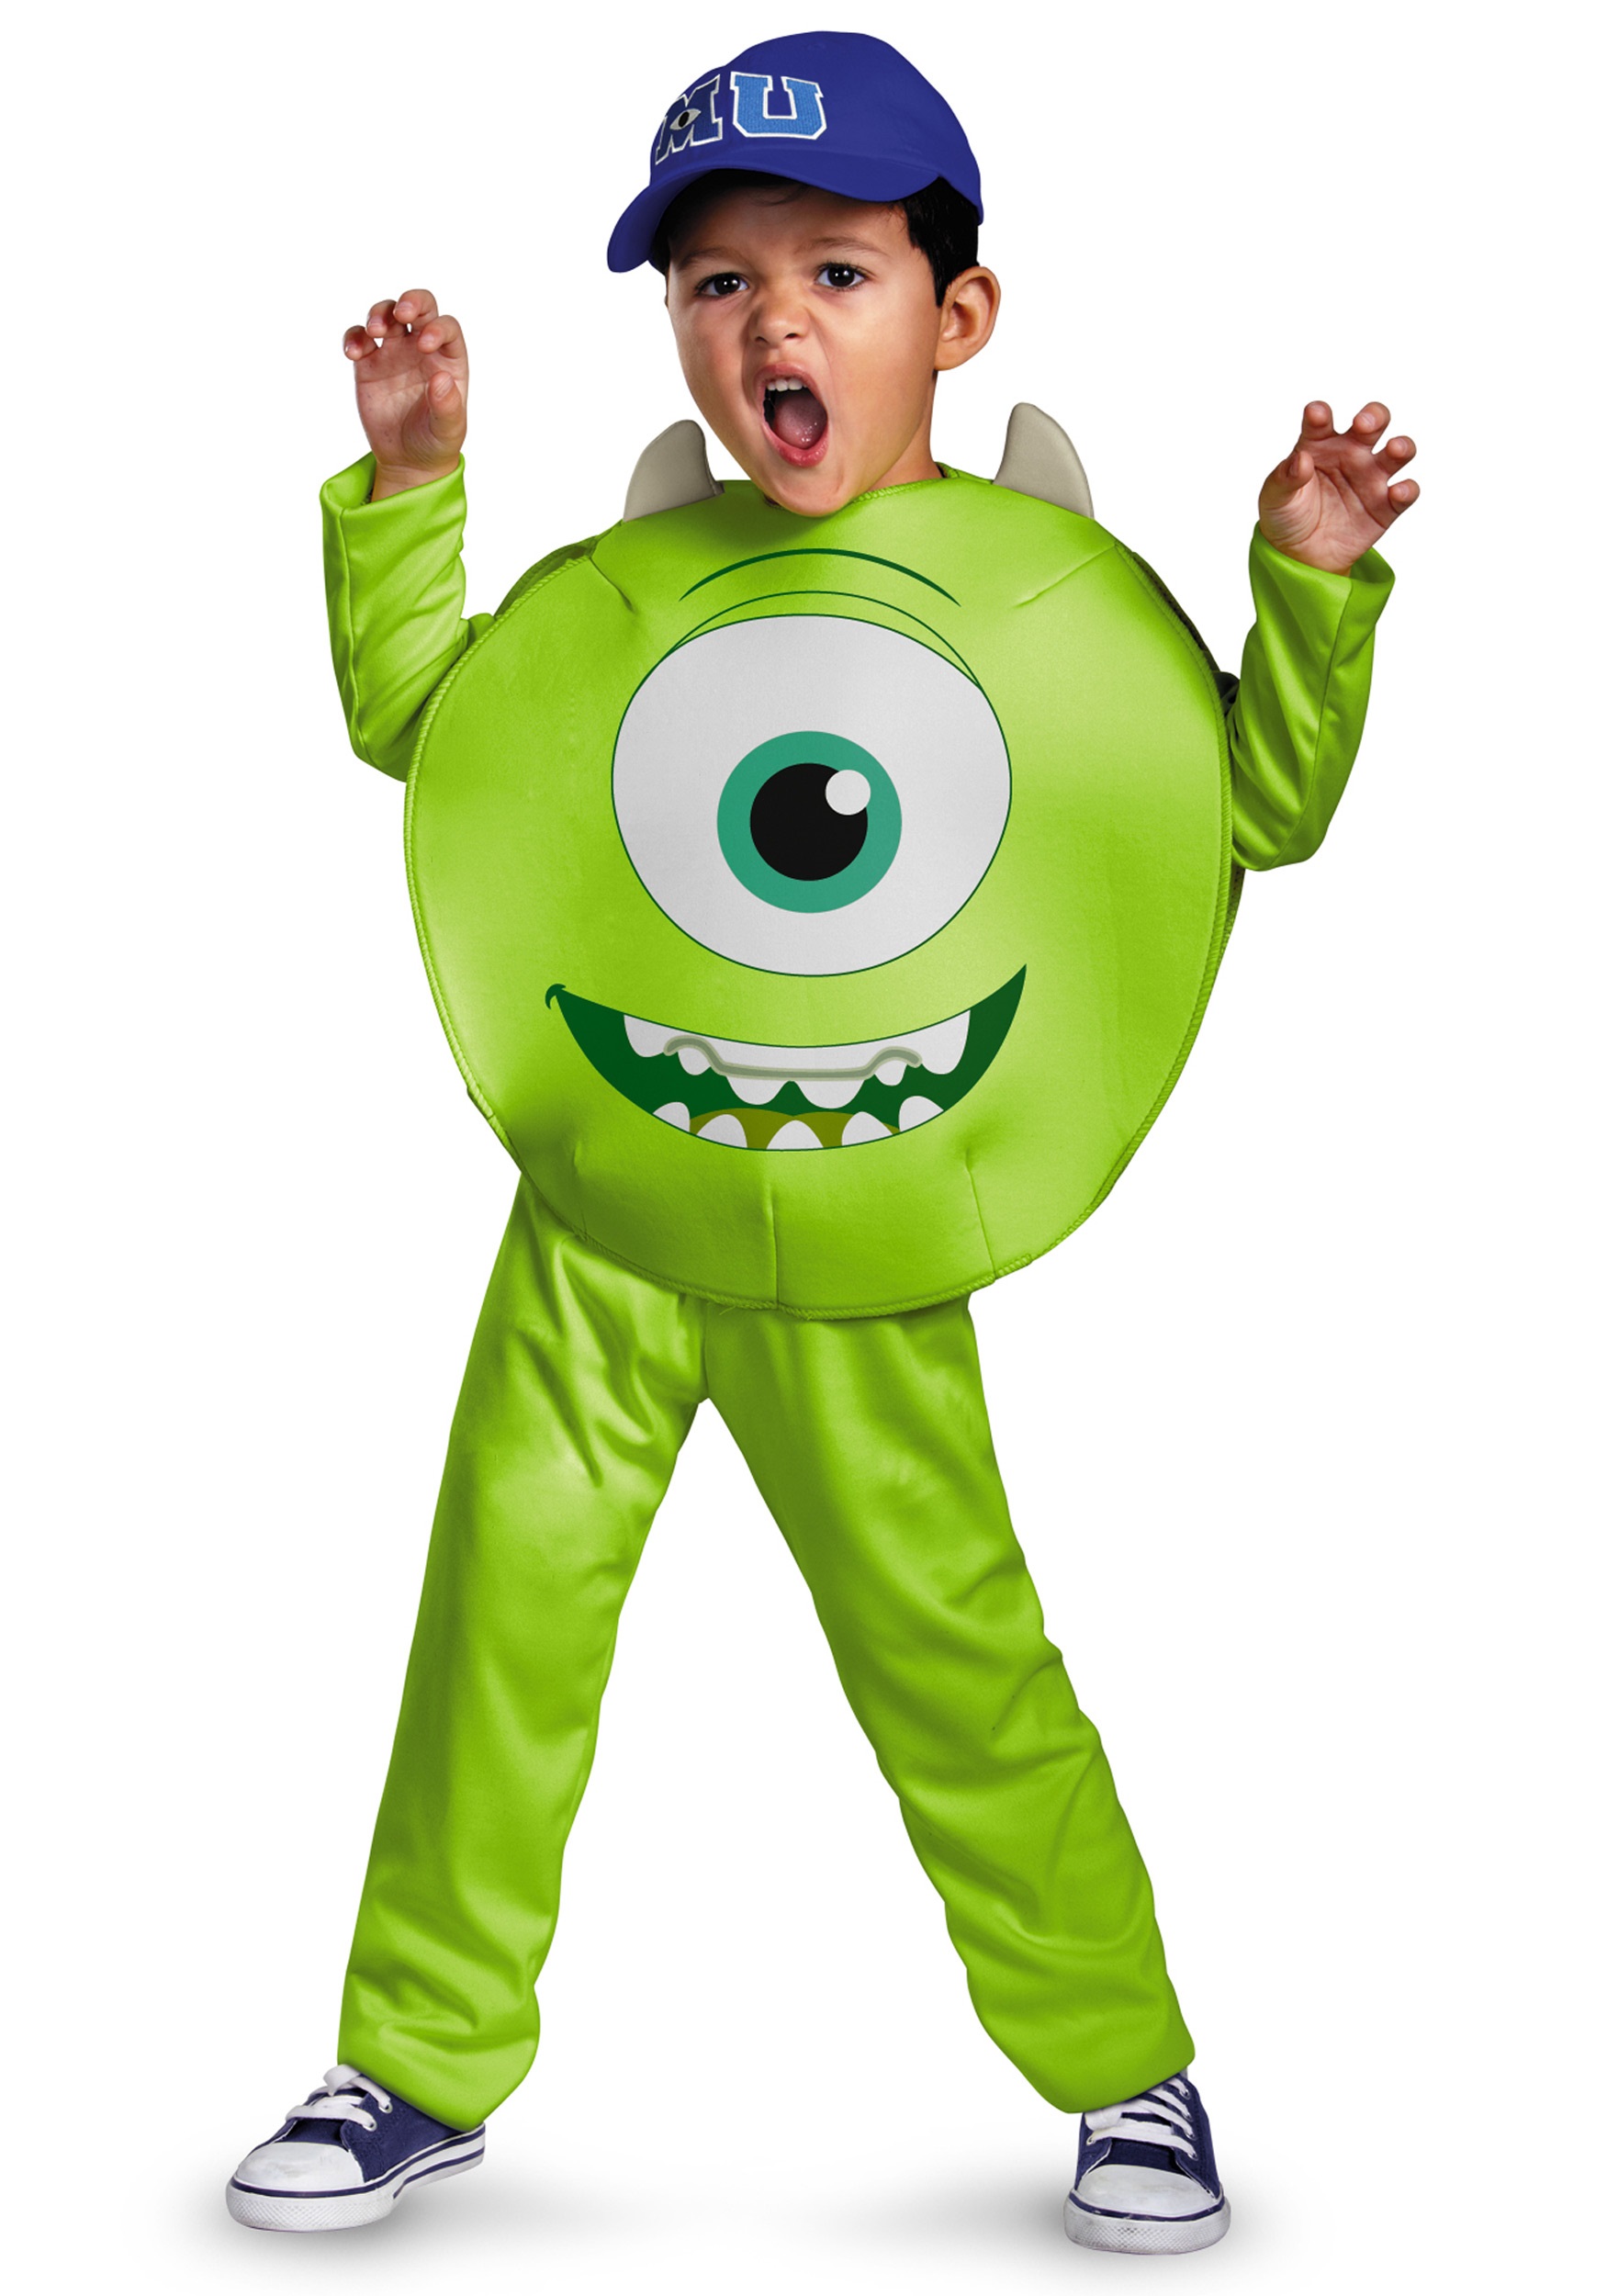 Toddler Classic Mike Costume - Halloween Costume Ideas 2022.